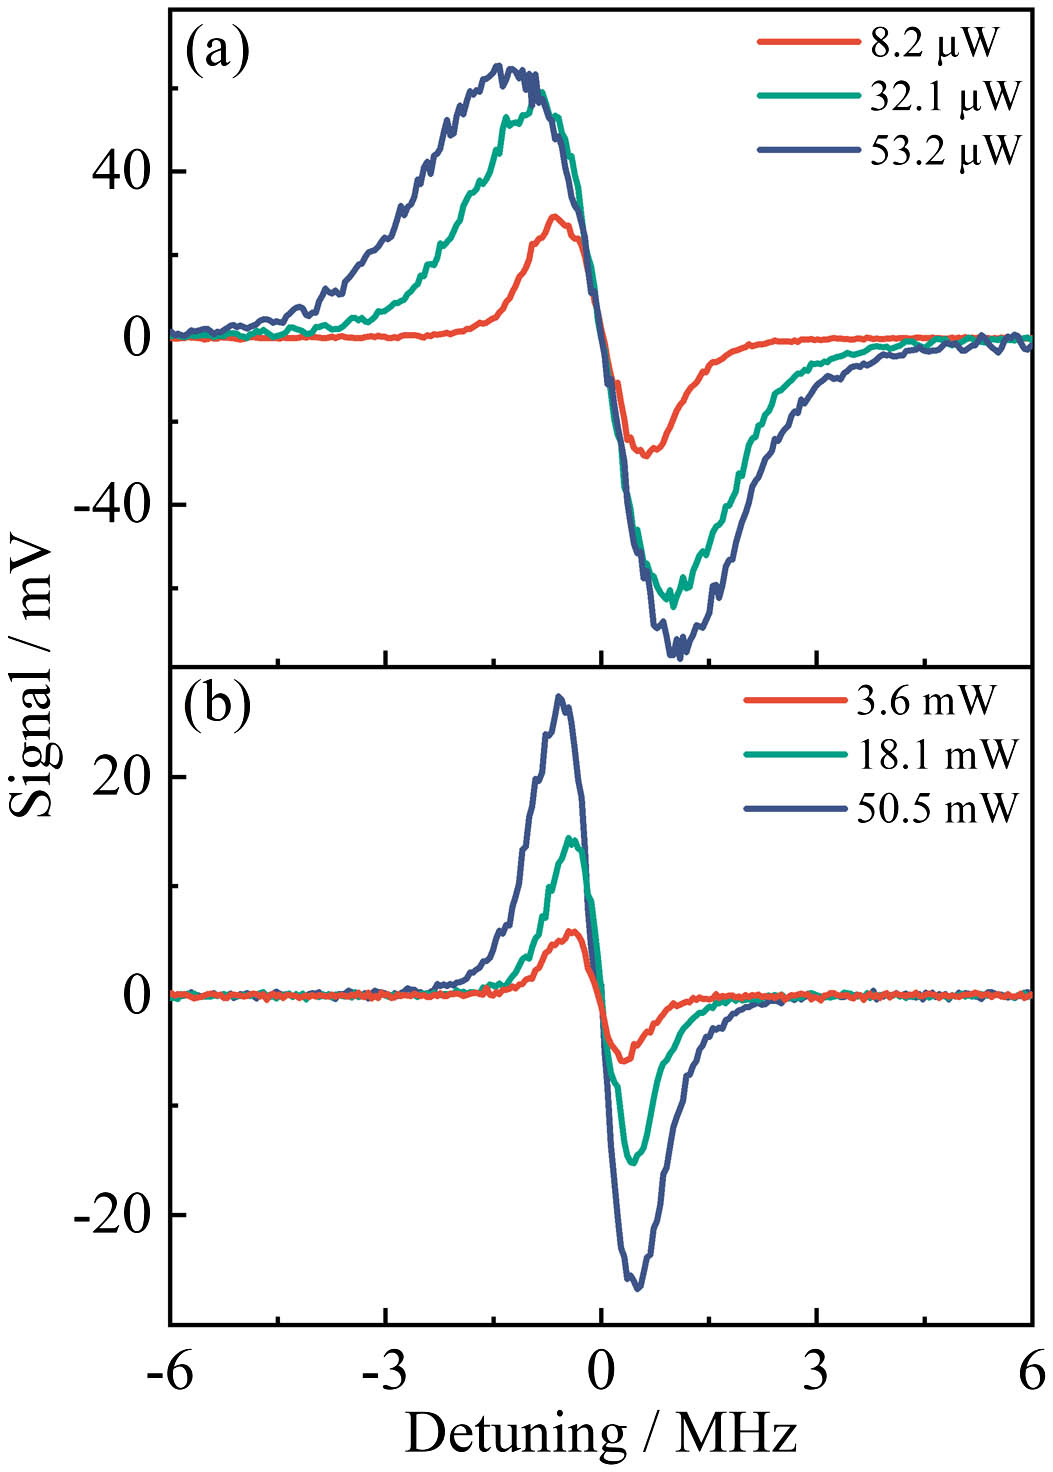 Error signals under varying probe and coupling beam powers. (a) The coupling beam power is fixed at 91 mW, and the probe beam power is 8.2 µW (red curve), 32.1 µW (green curve), and 53.2 µW (blue curve), respectively. (b) The probe beam power is fixed at 7.6 µW, and the coupling beam power is 3.6 mW (red curve), 18.1 mW (green curve), and 50.5 mW (blue curve), respectively.